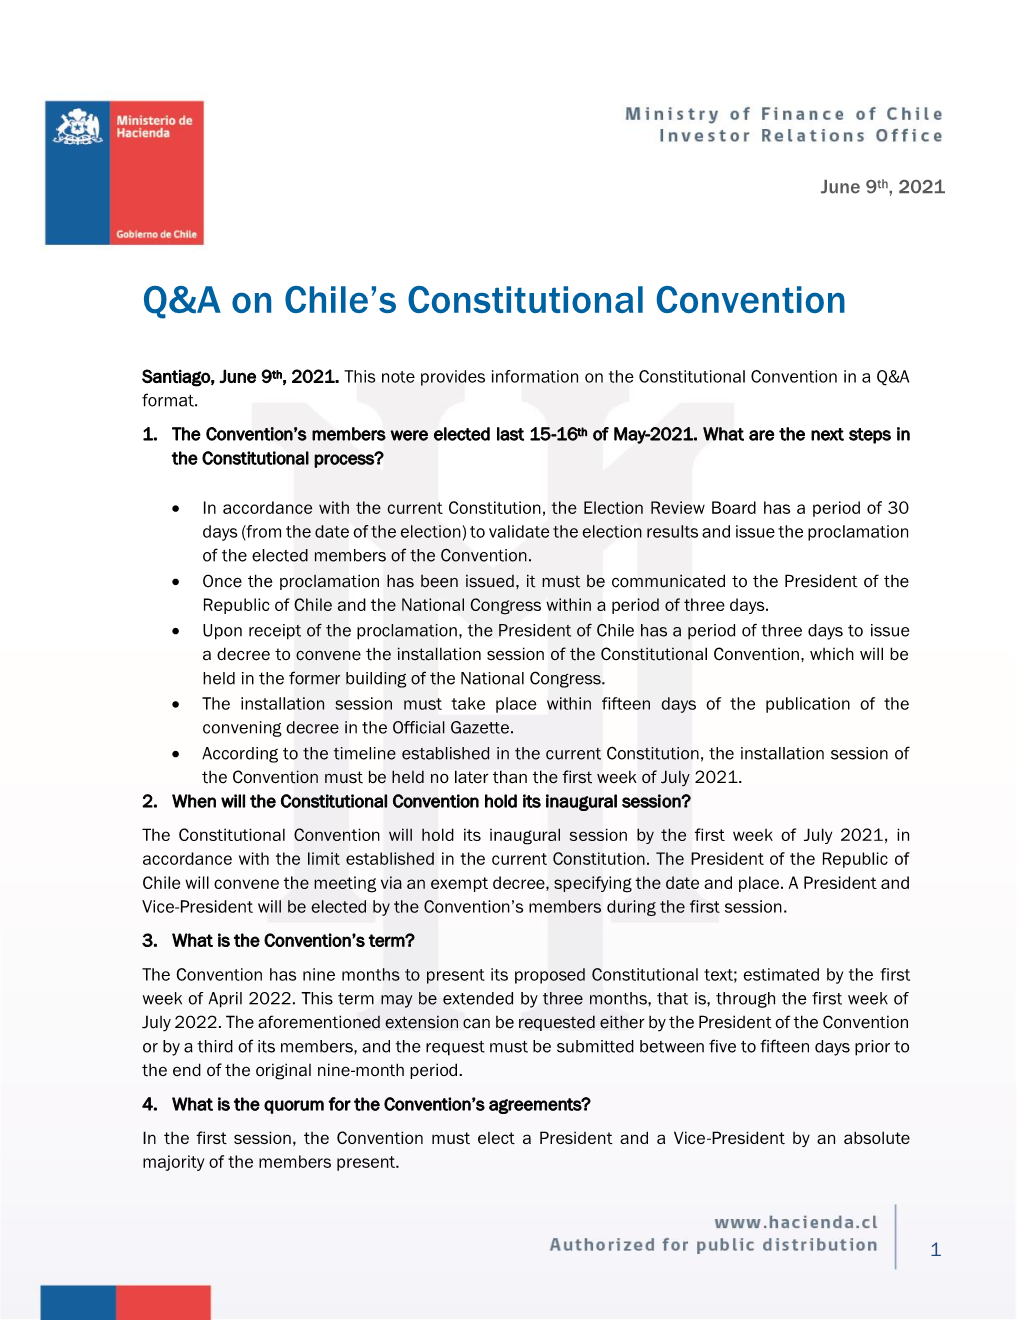 Q&A on Chile's Constitutional Convention